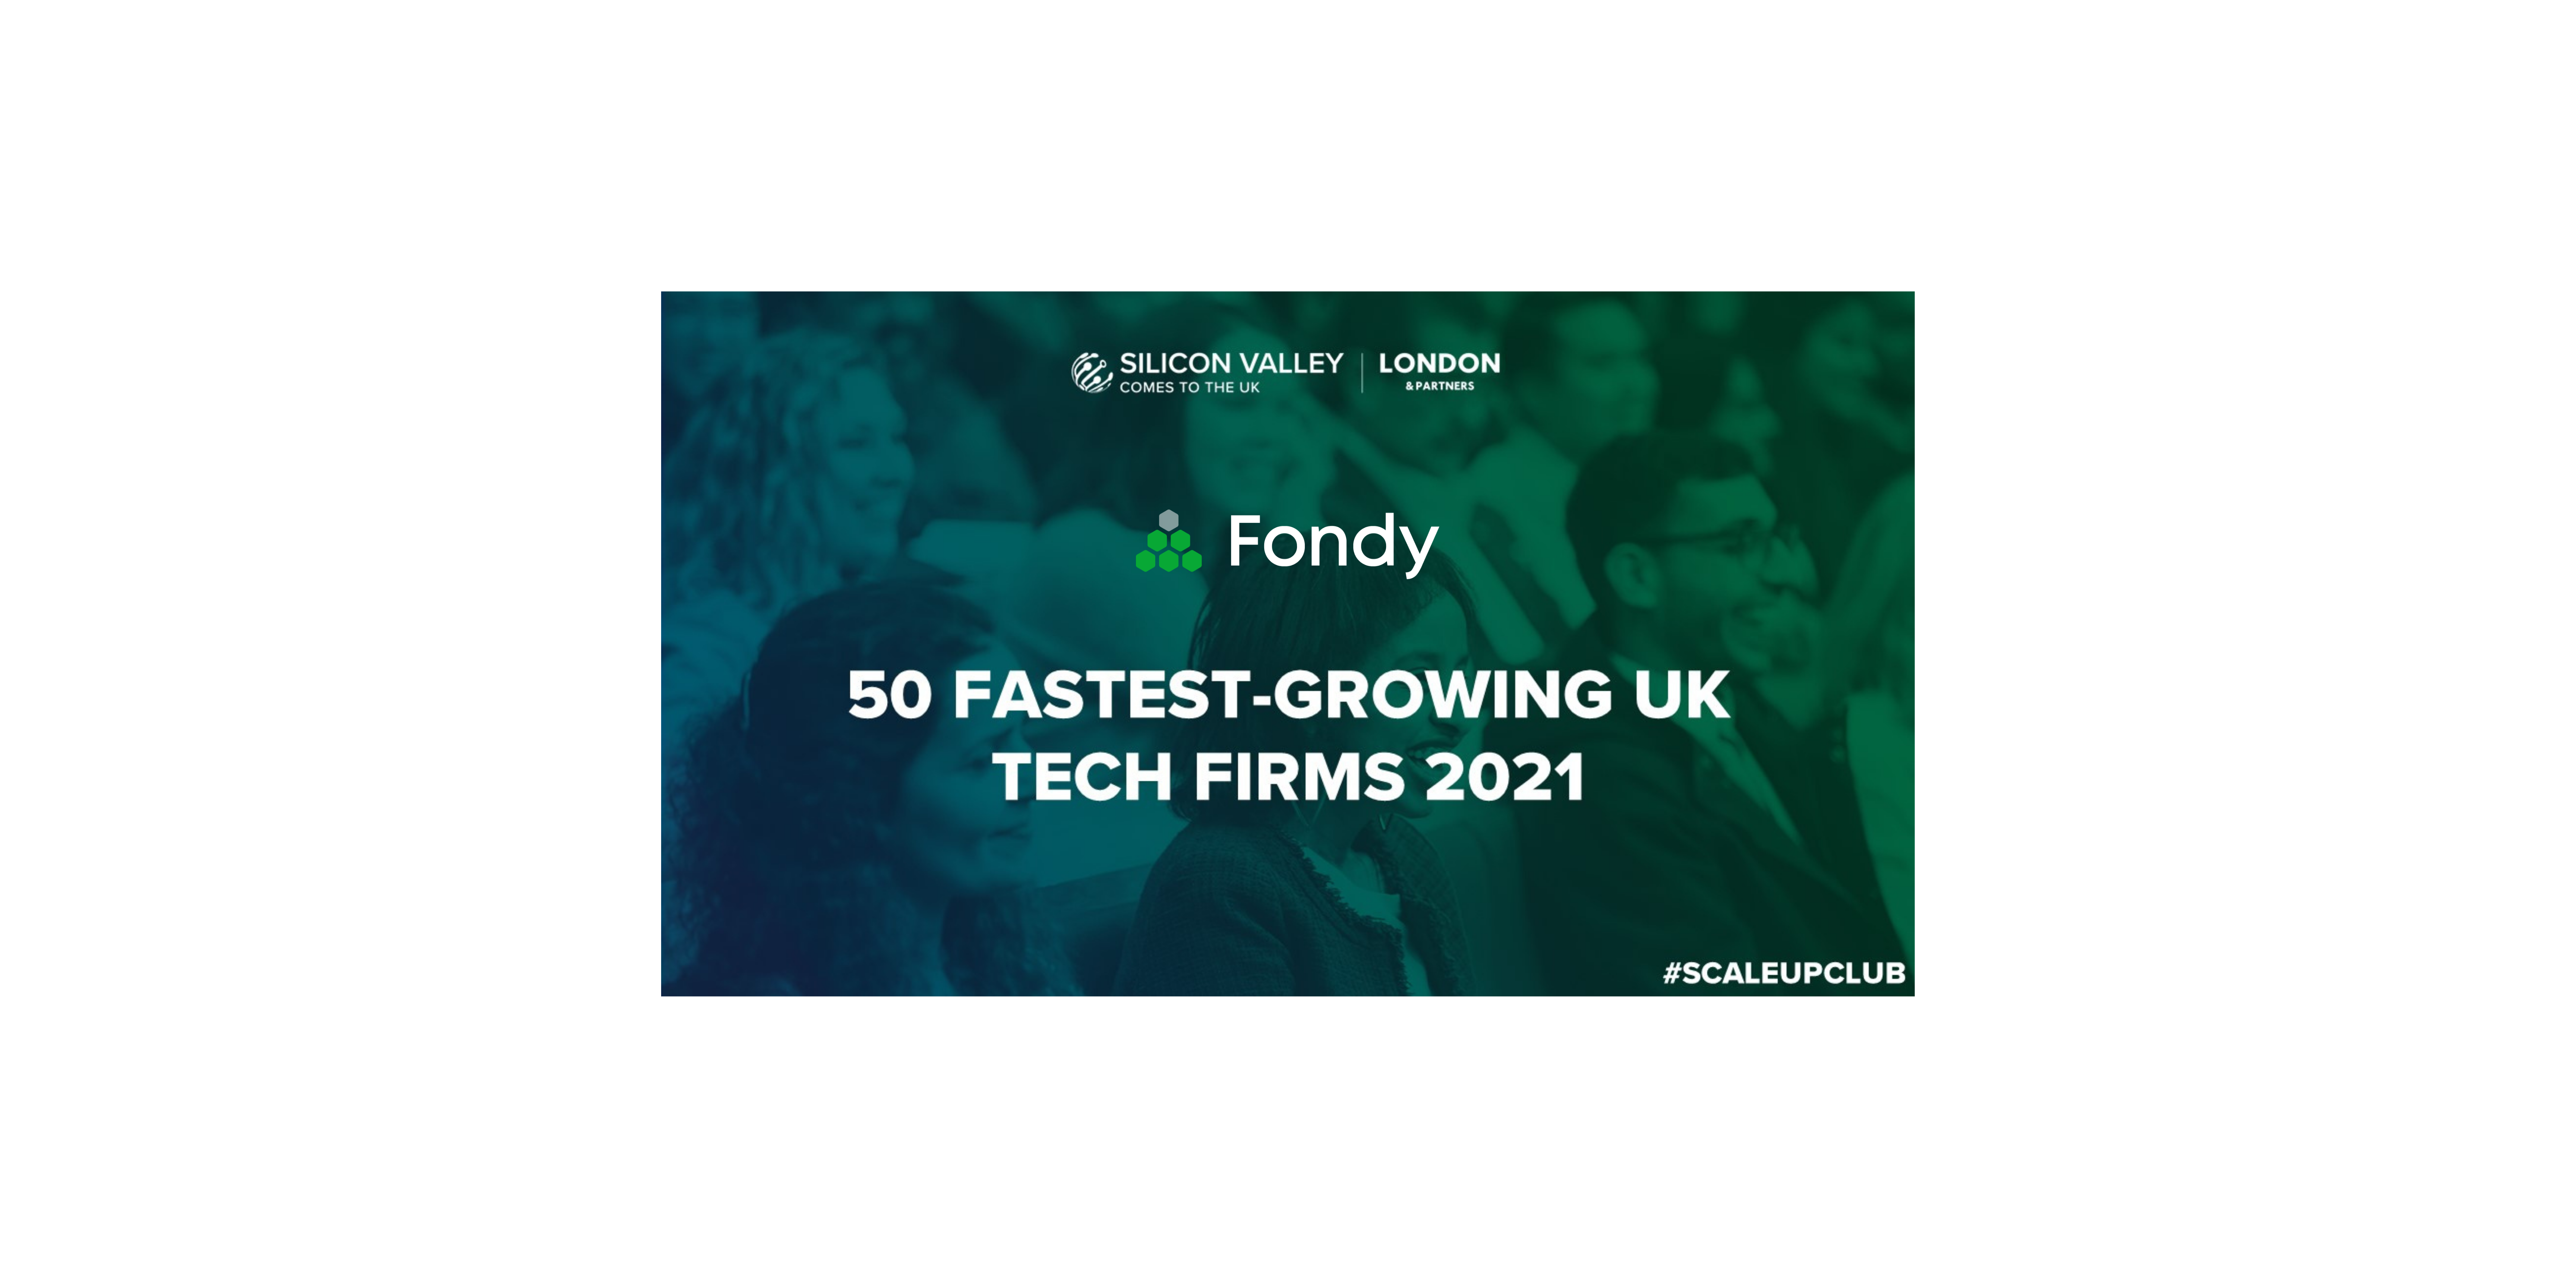 Meet the UK’s 50 fastest-growing startups: Fondy named in SVC2UK’s 2021 Scale Up Club